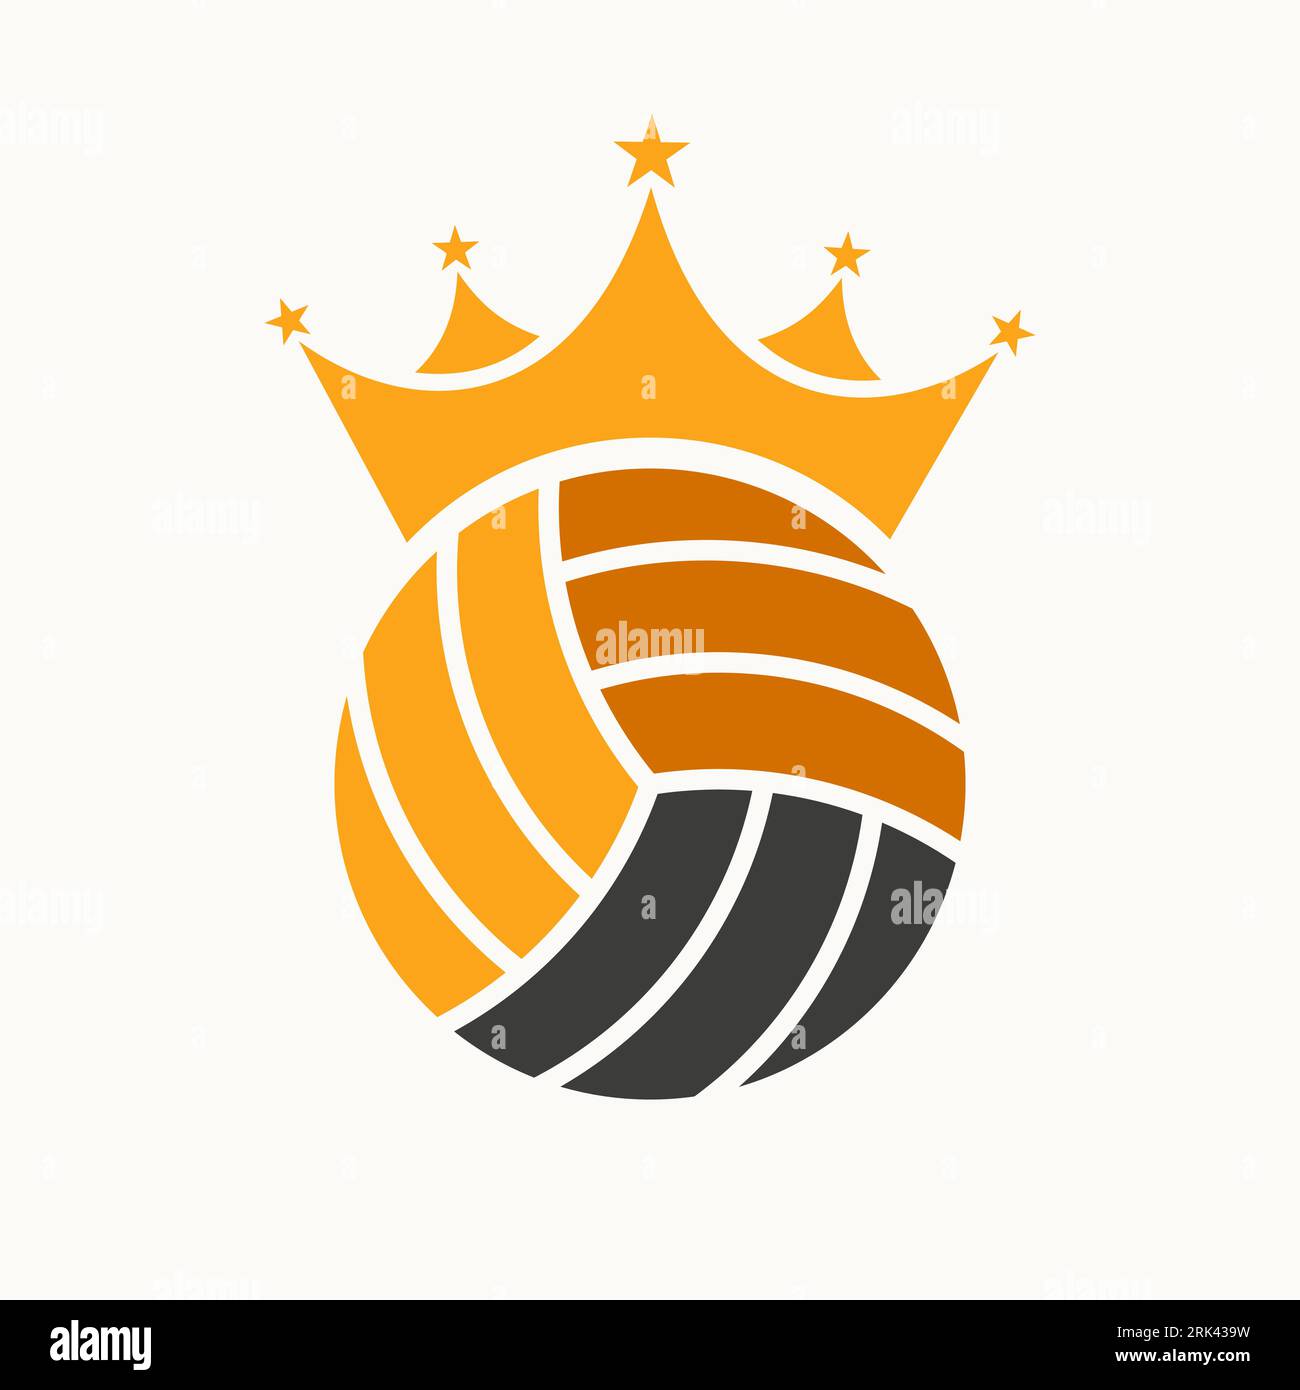 Volleyball Logo Design Concept With Crown Icon. Volleyball Winner Symbol Stock Vector